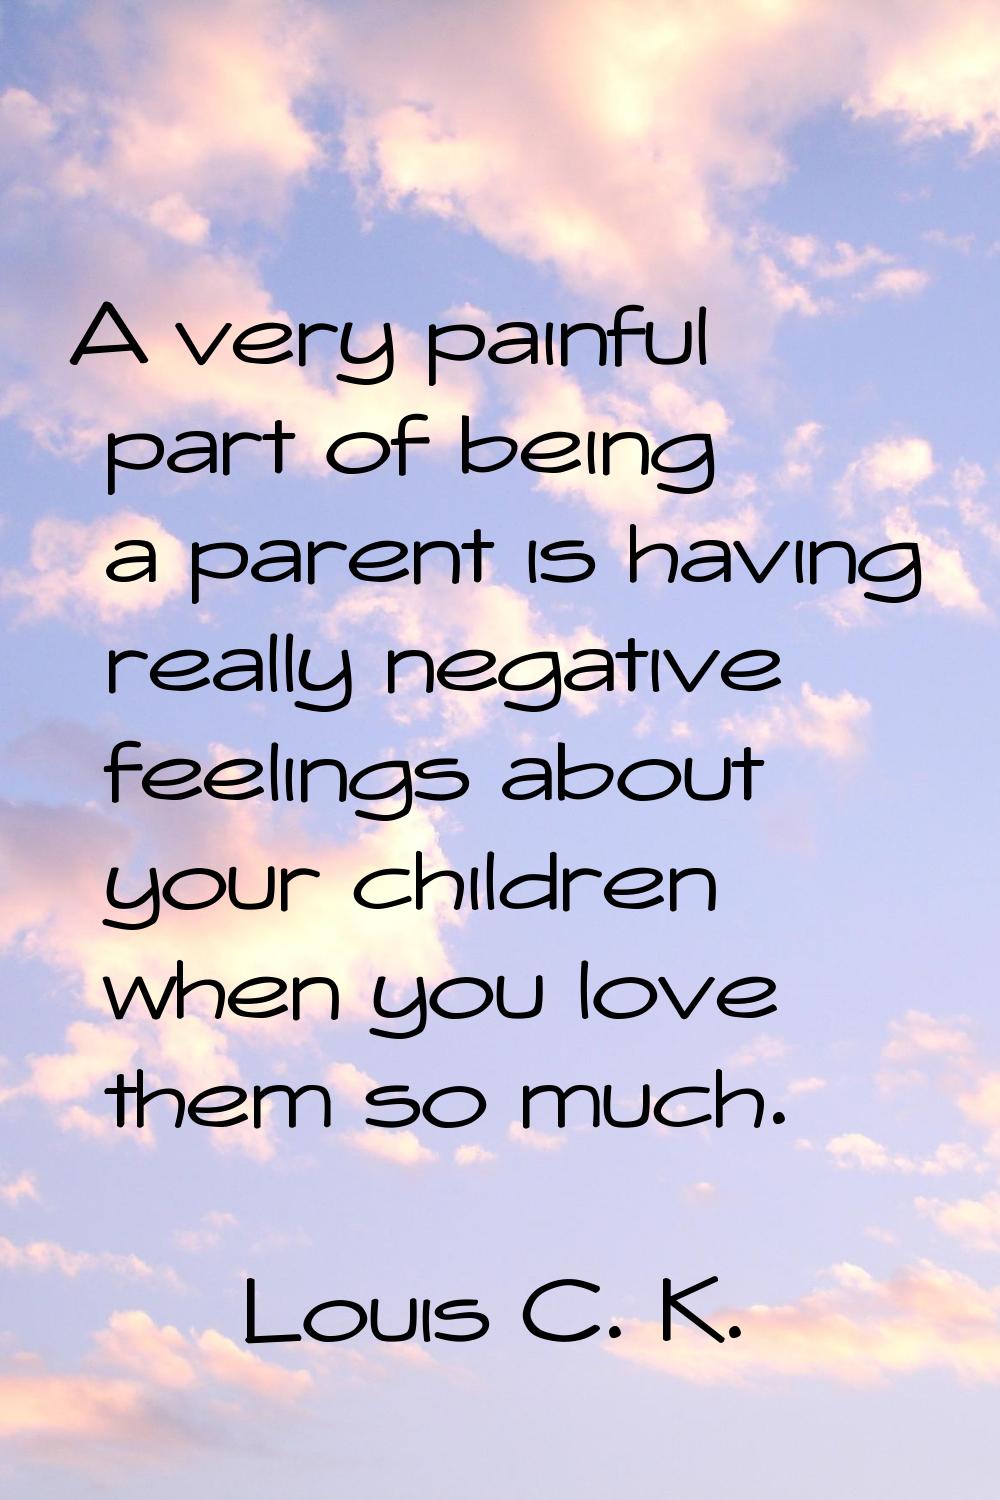 A very painful part of being a parent is having really negative feelings about your children when y